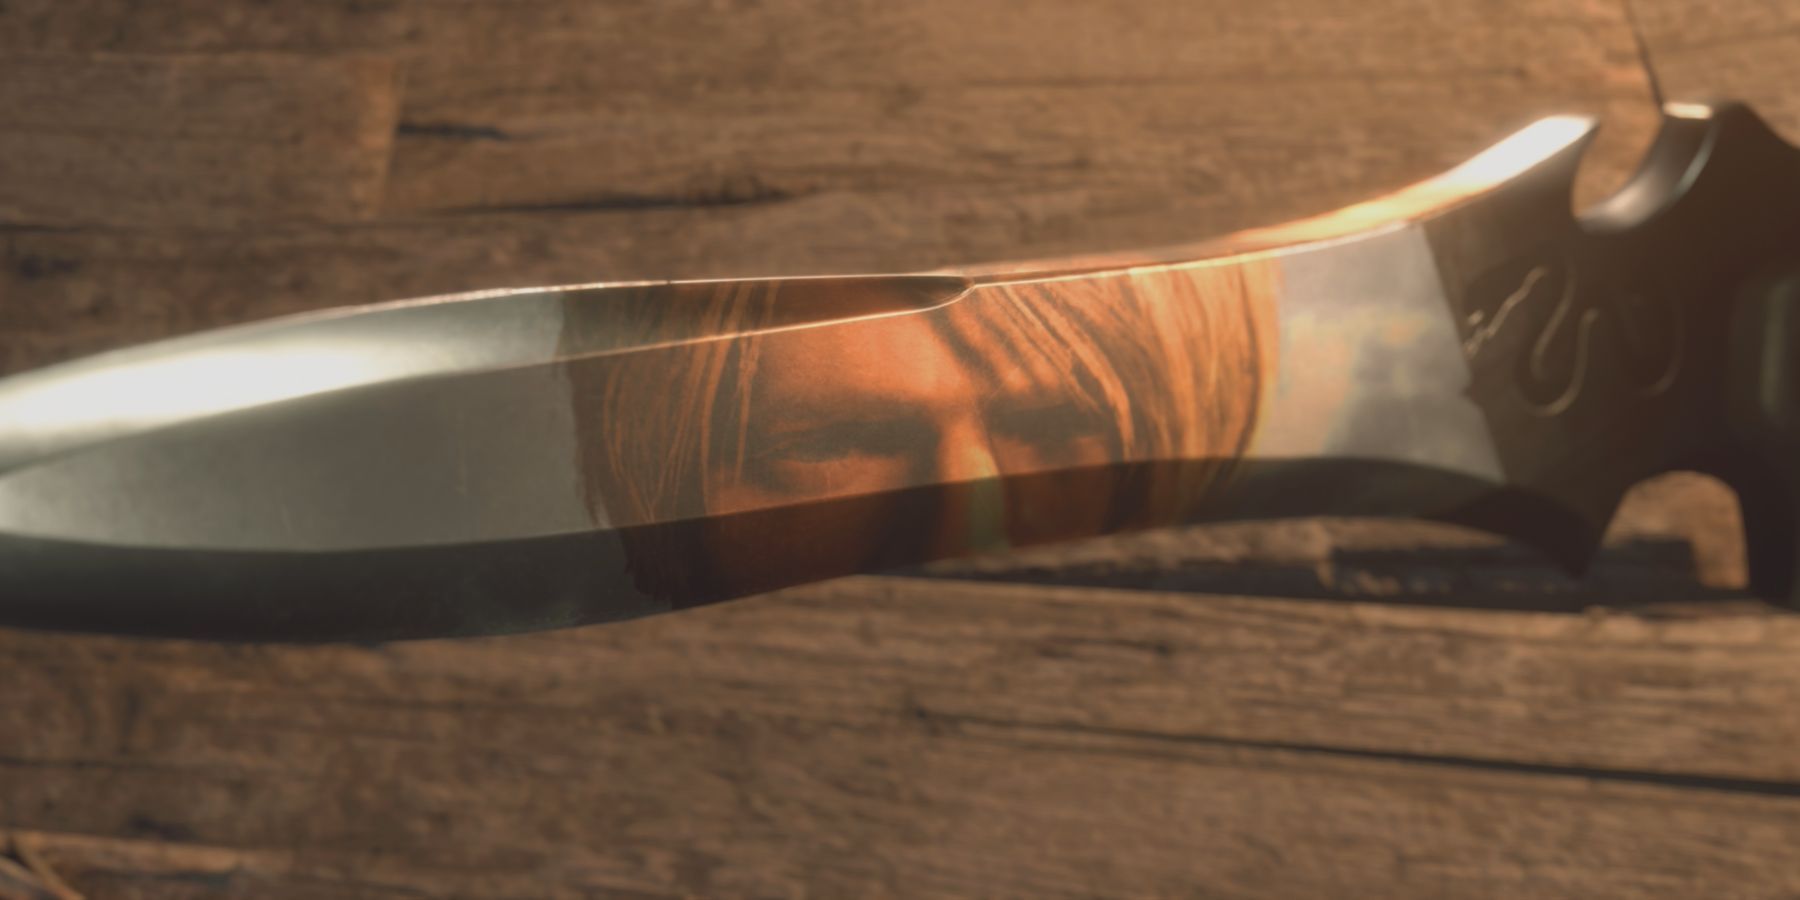 I want to buy a replica of Jack Krauser's knife from Resident Evil 4's  remake, but I'm really confused with some shady things : r/SWORDS